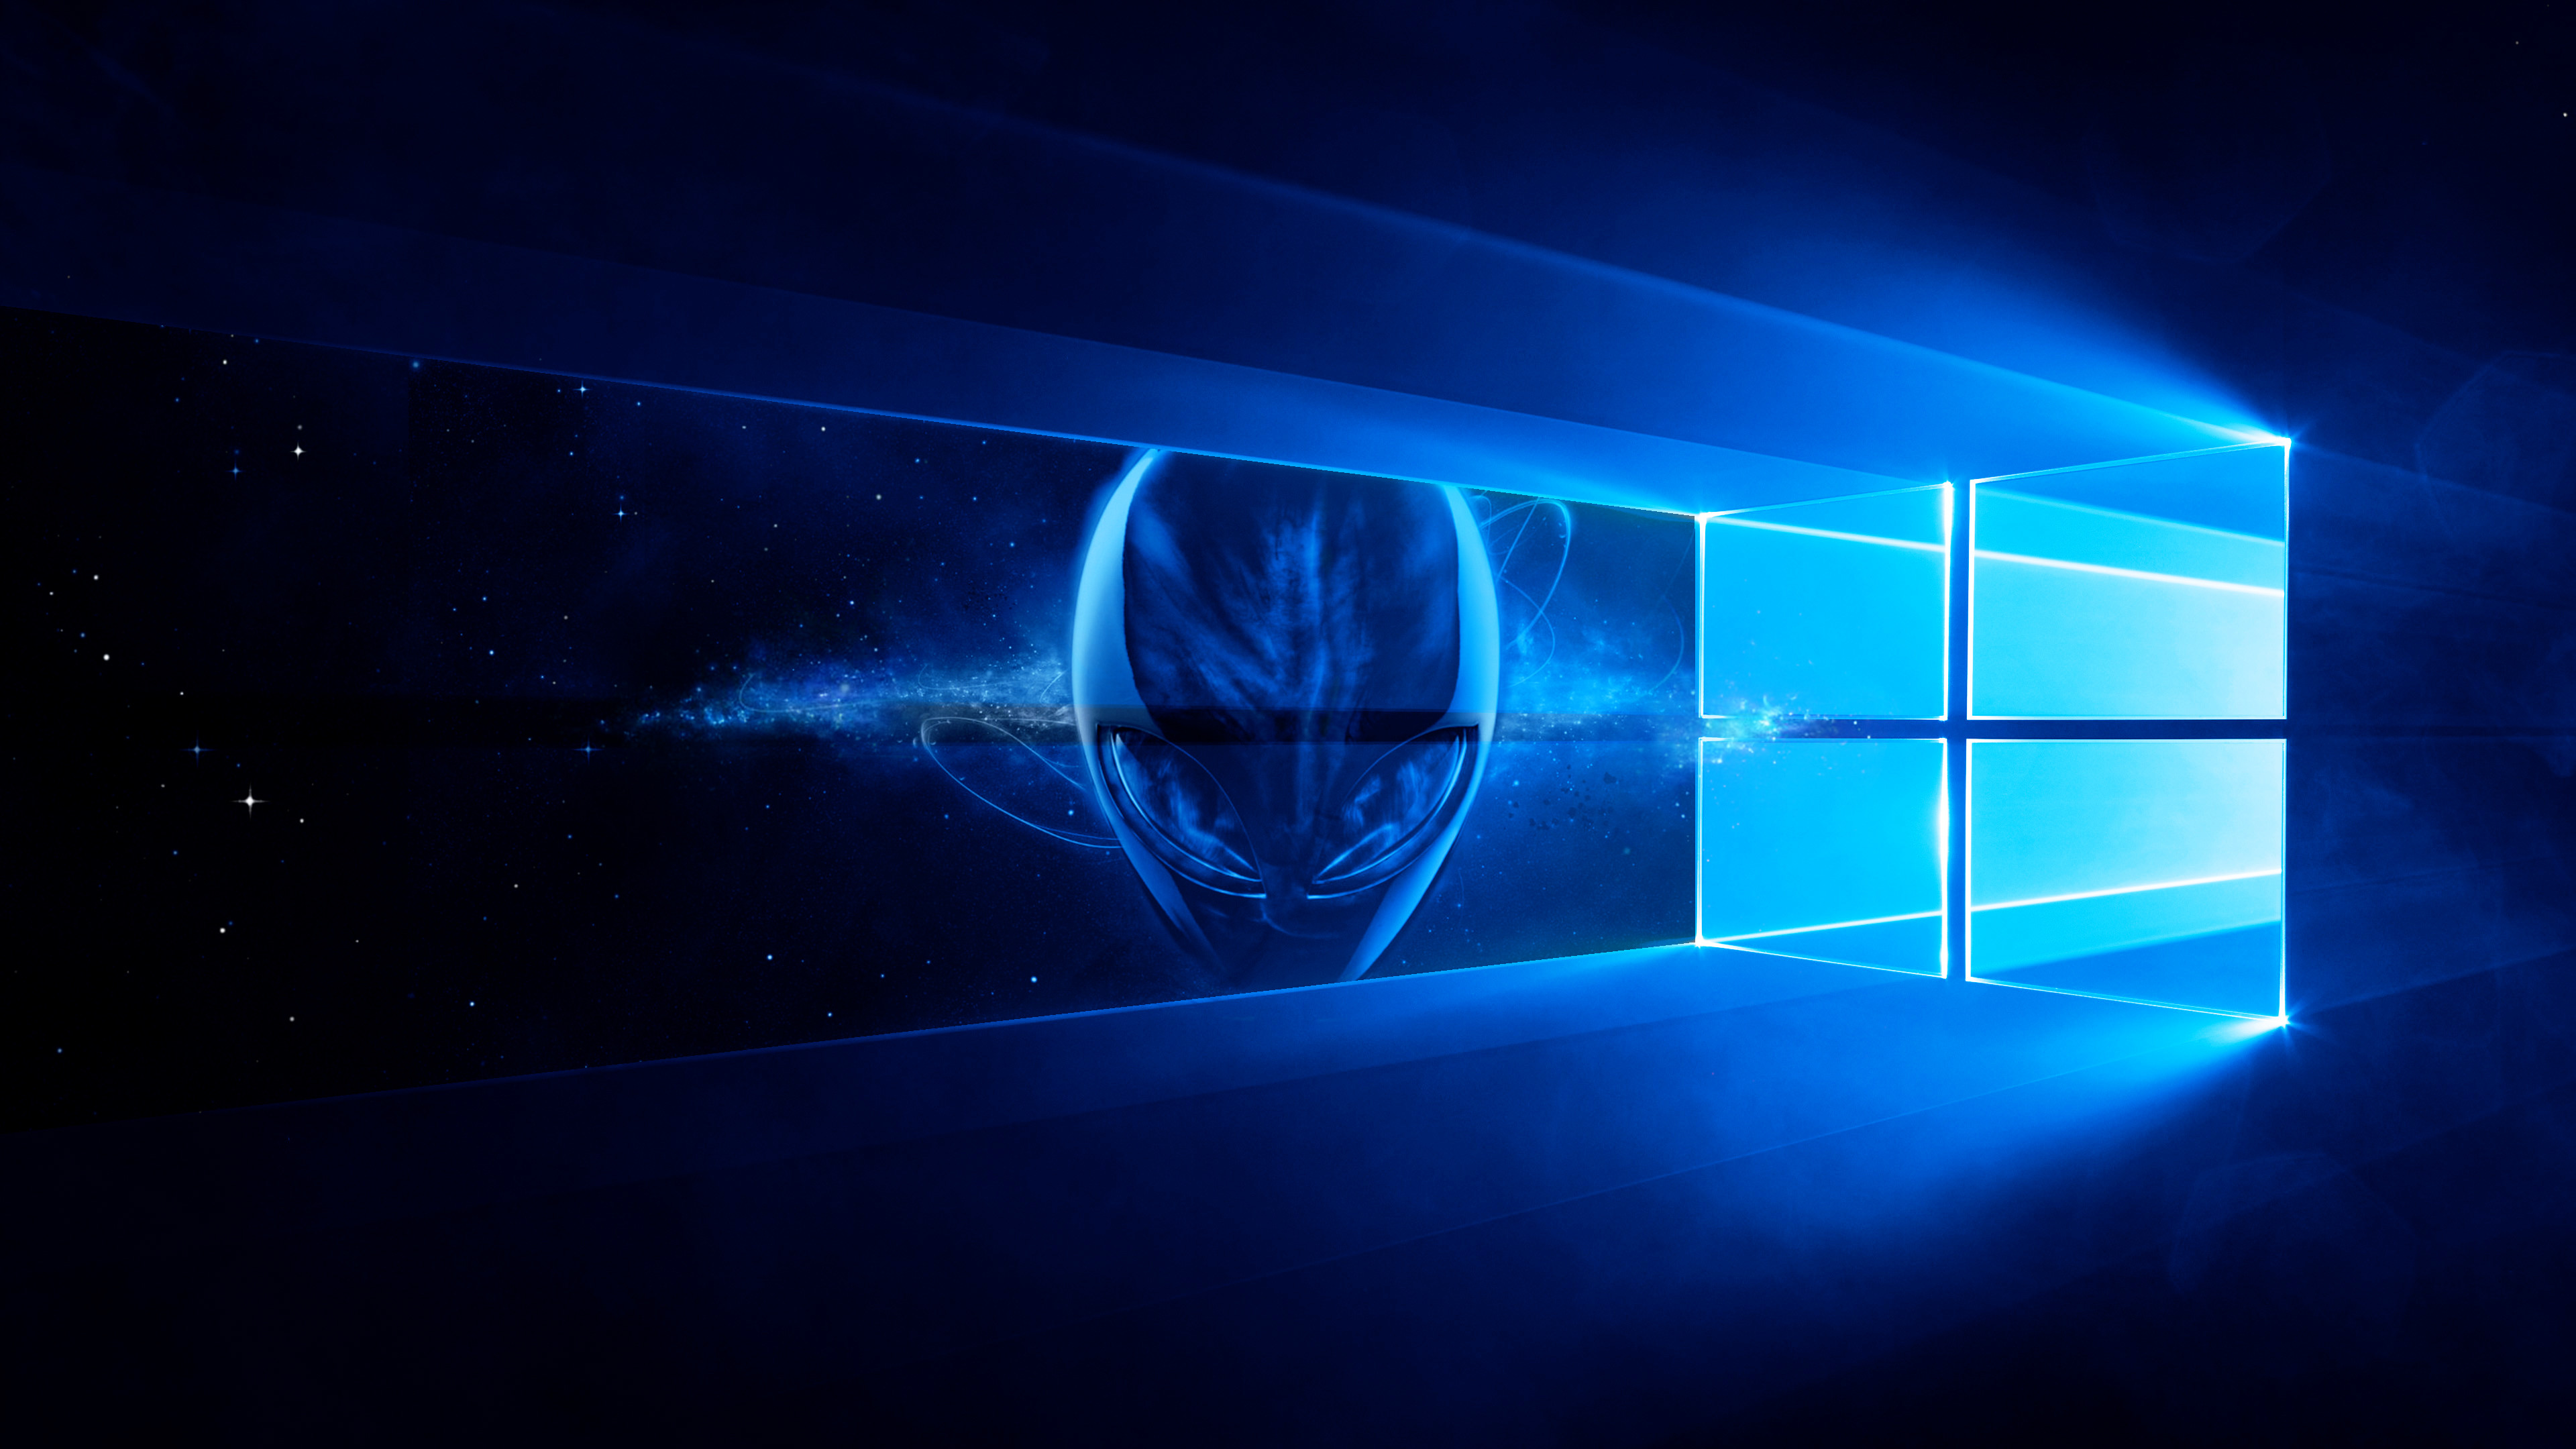 3840x2160 Backgrounds for PC: Alienware.  2.312 MB